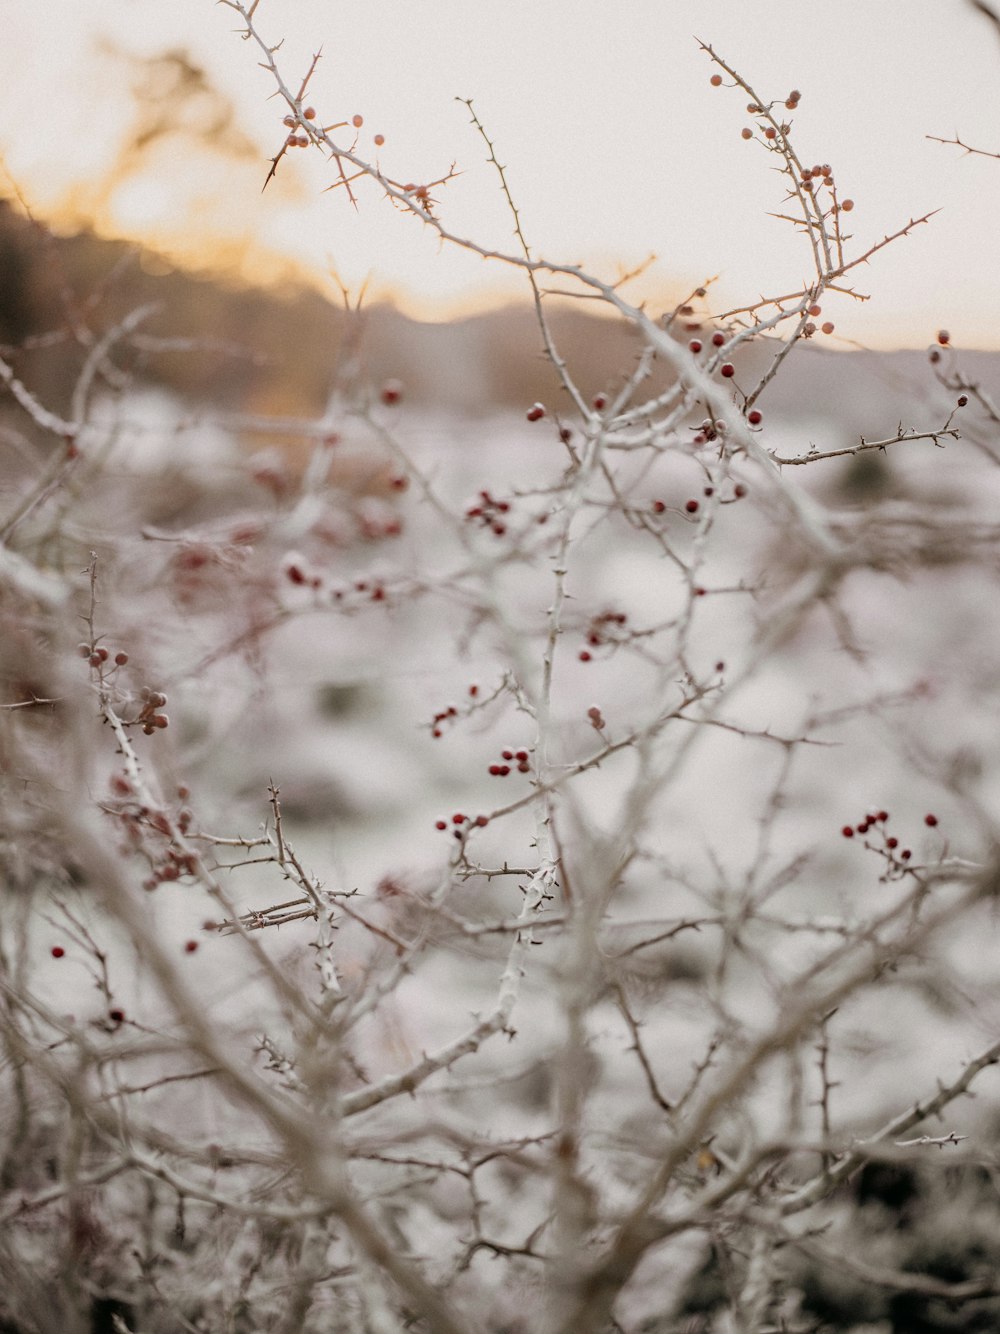 a bush with red berries on it in the snow